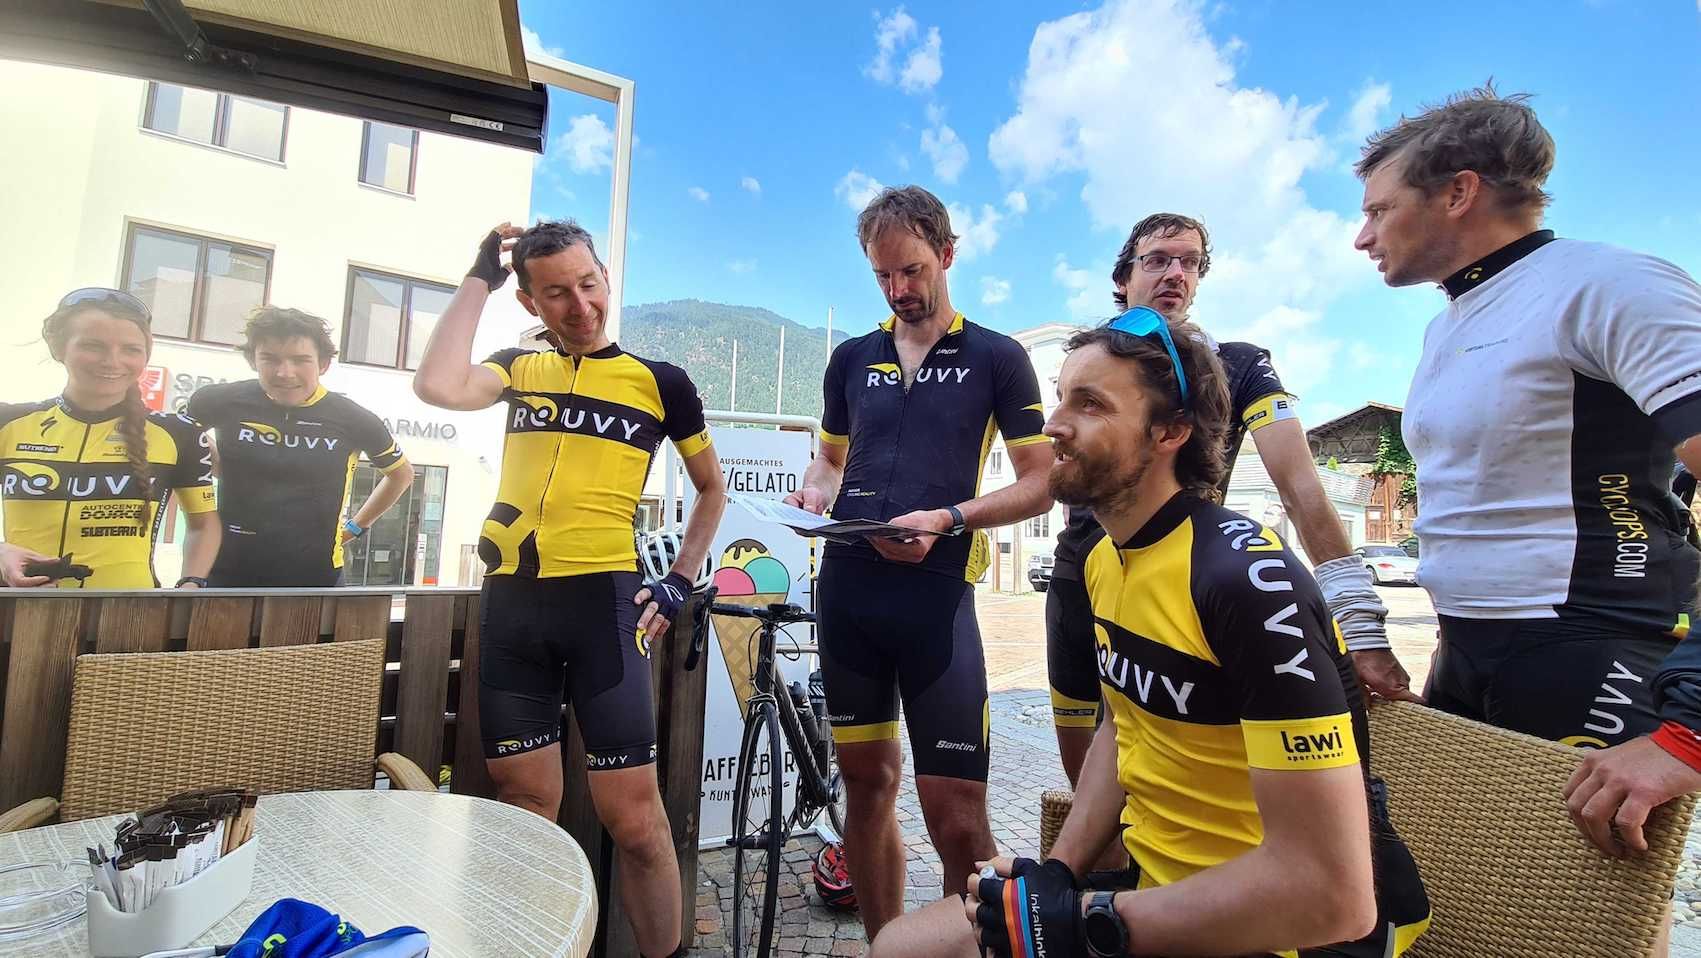 Group of ROUVY riders at a roadside cafe in Italy